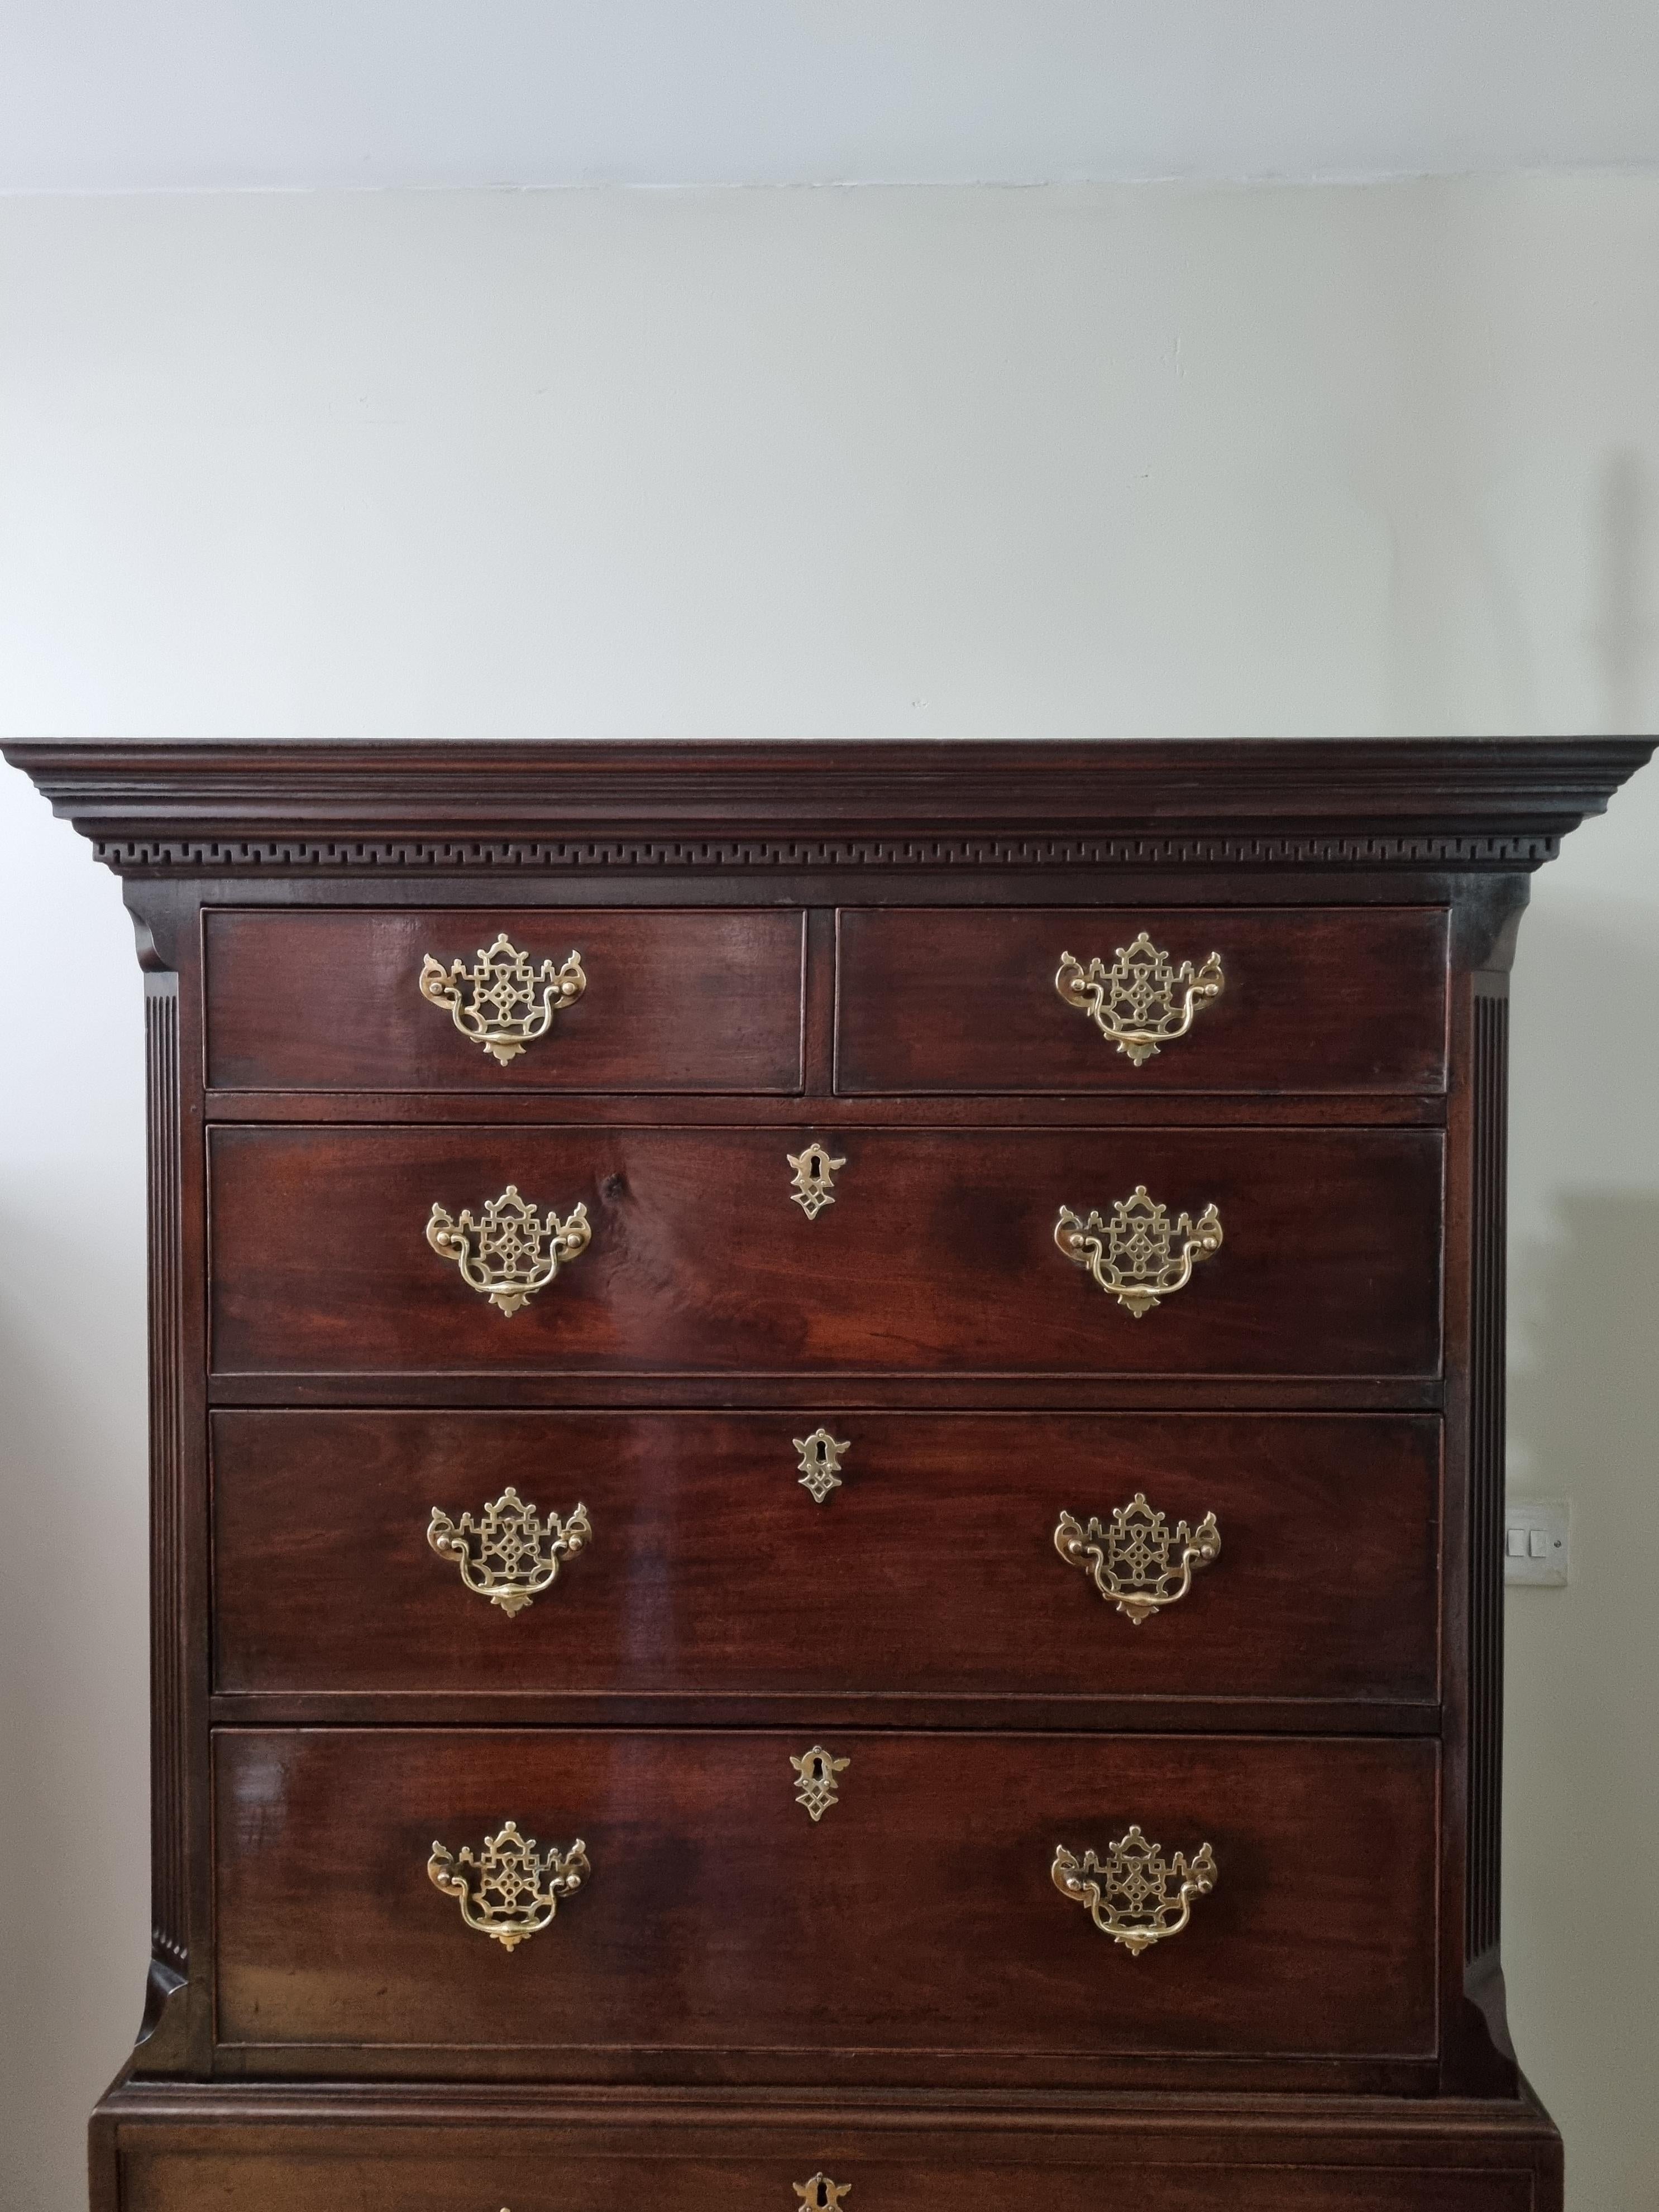  George III Figured Mahogany Tallboy Chest on Chest Circa 1760s For Sale 3